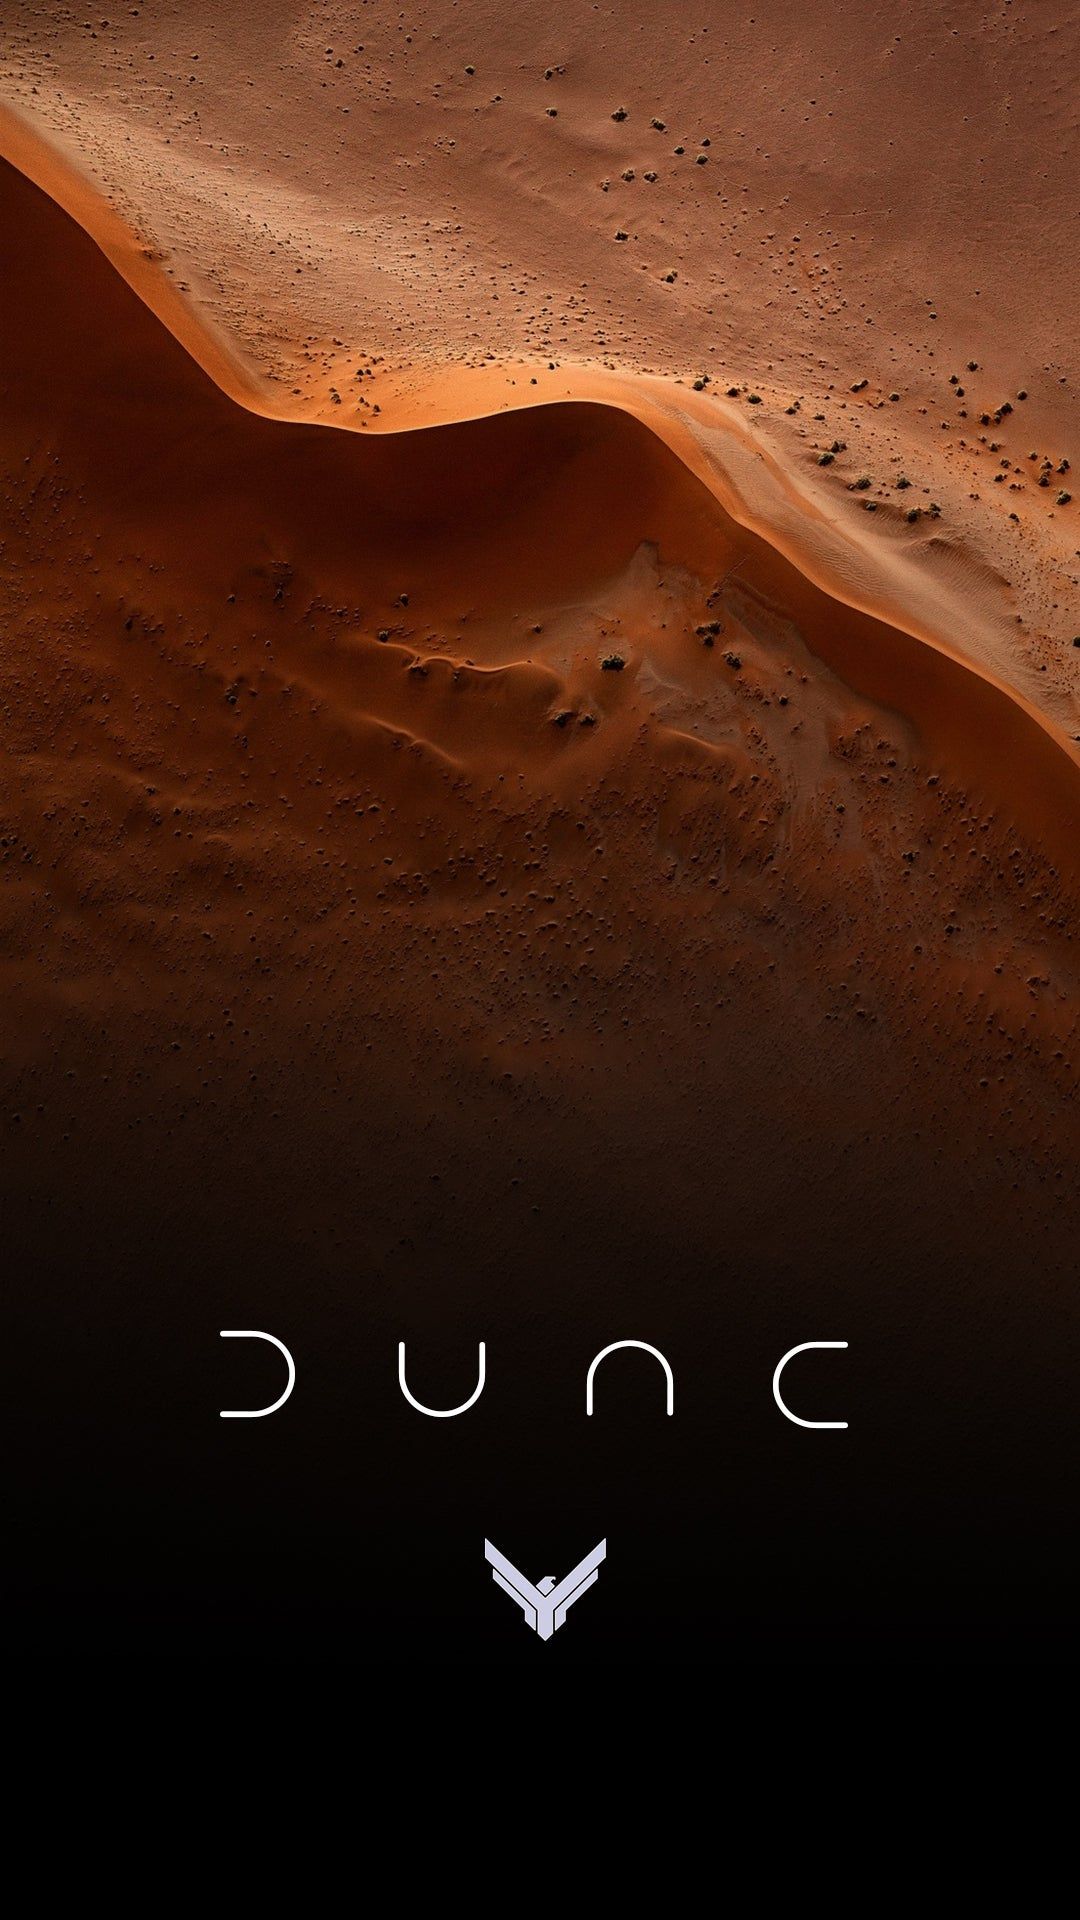 A simple phone wallpapers 1080 : dune